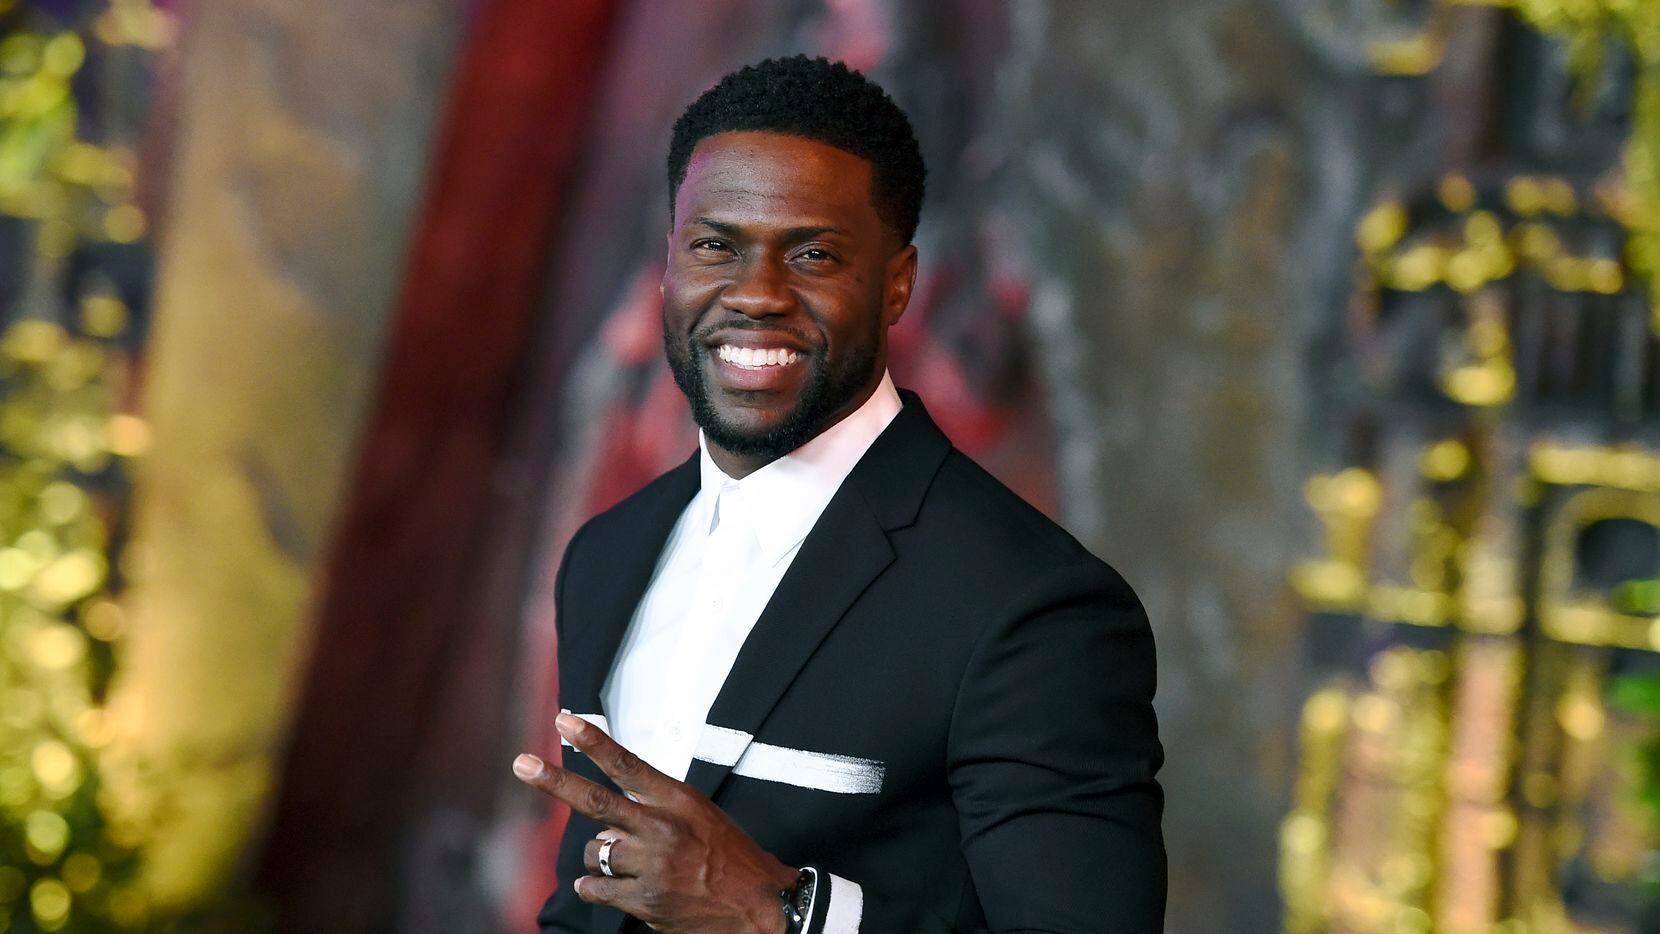 Kevin Hart recently visited Dallas and went to Happiest Hour.(Jordan Strauss/Invision)